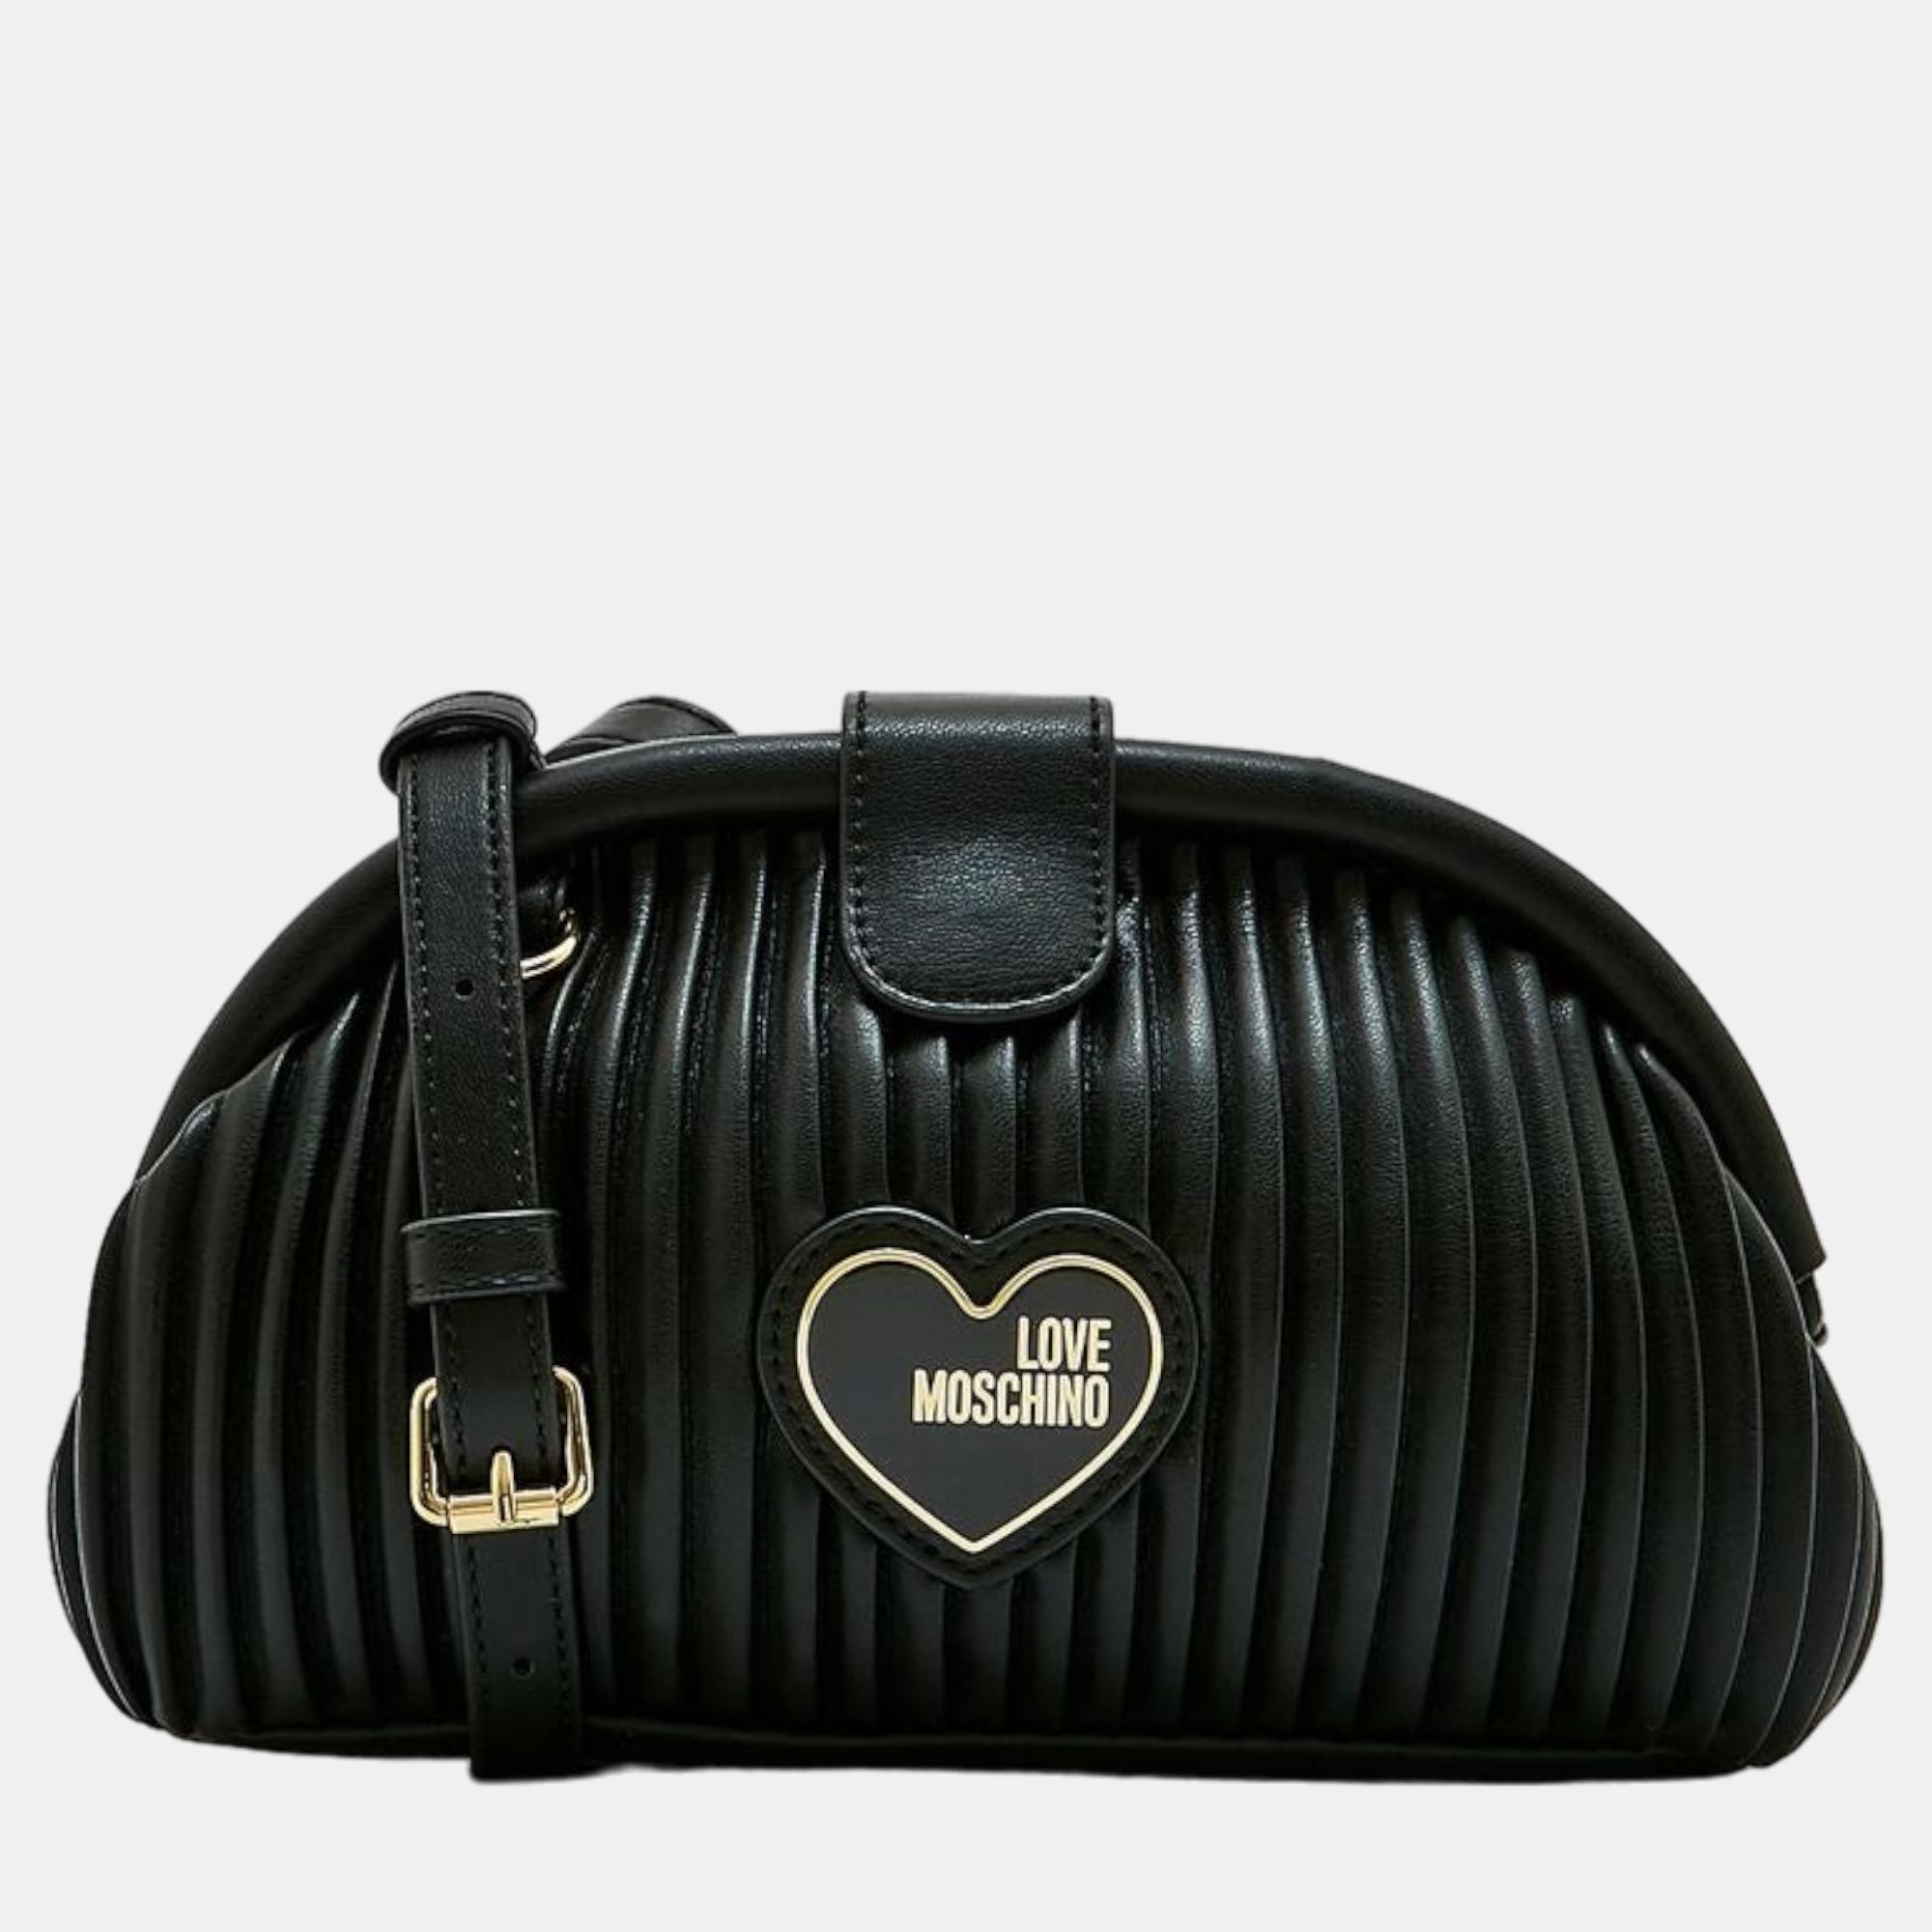 Pre-owned Love Moschino Black Pu Leather Shoulder Bag